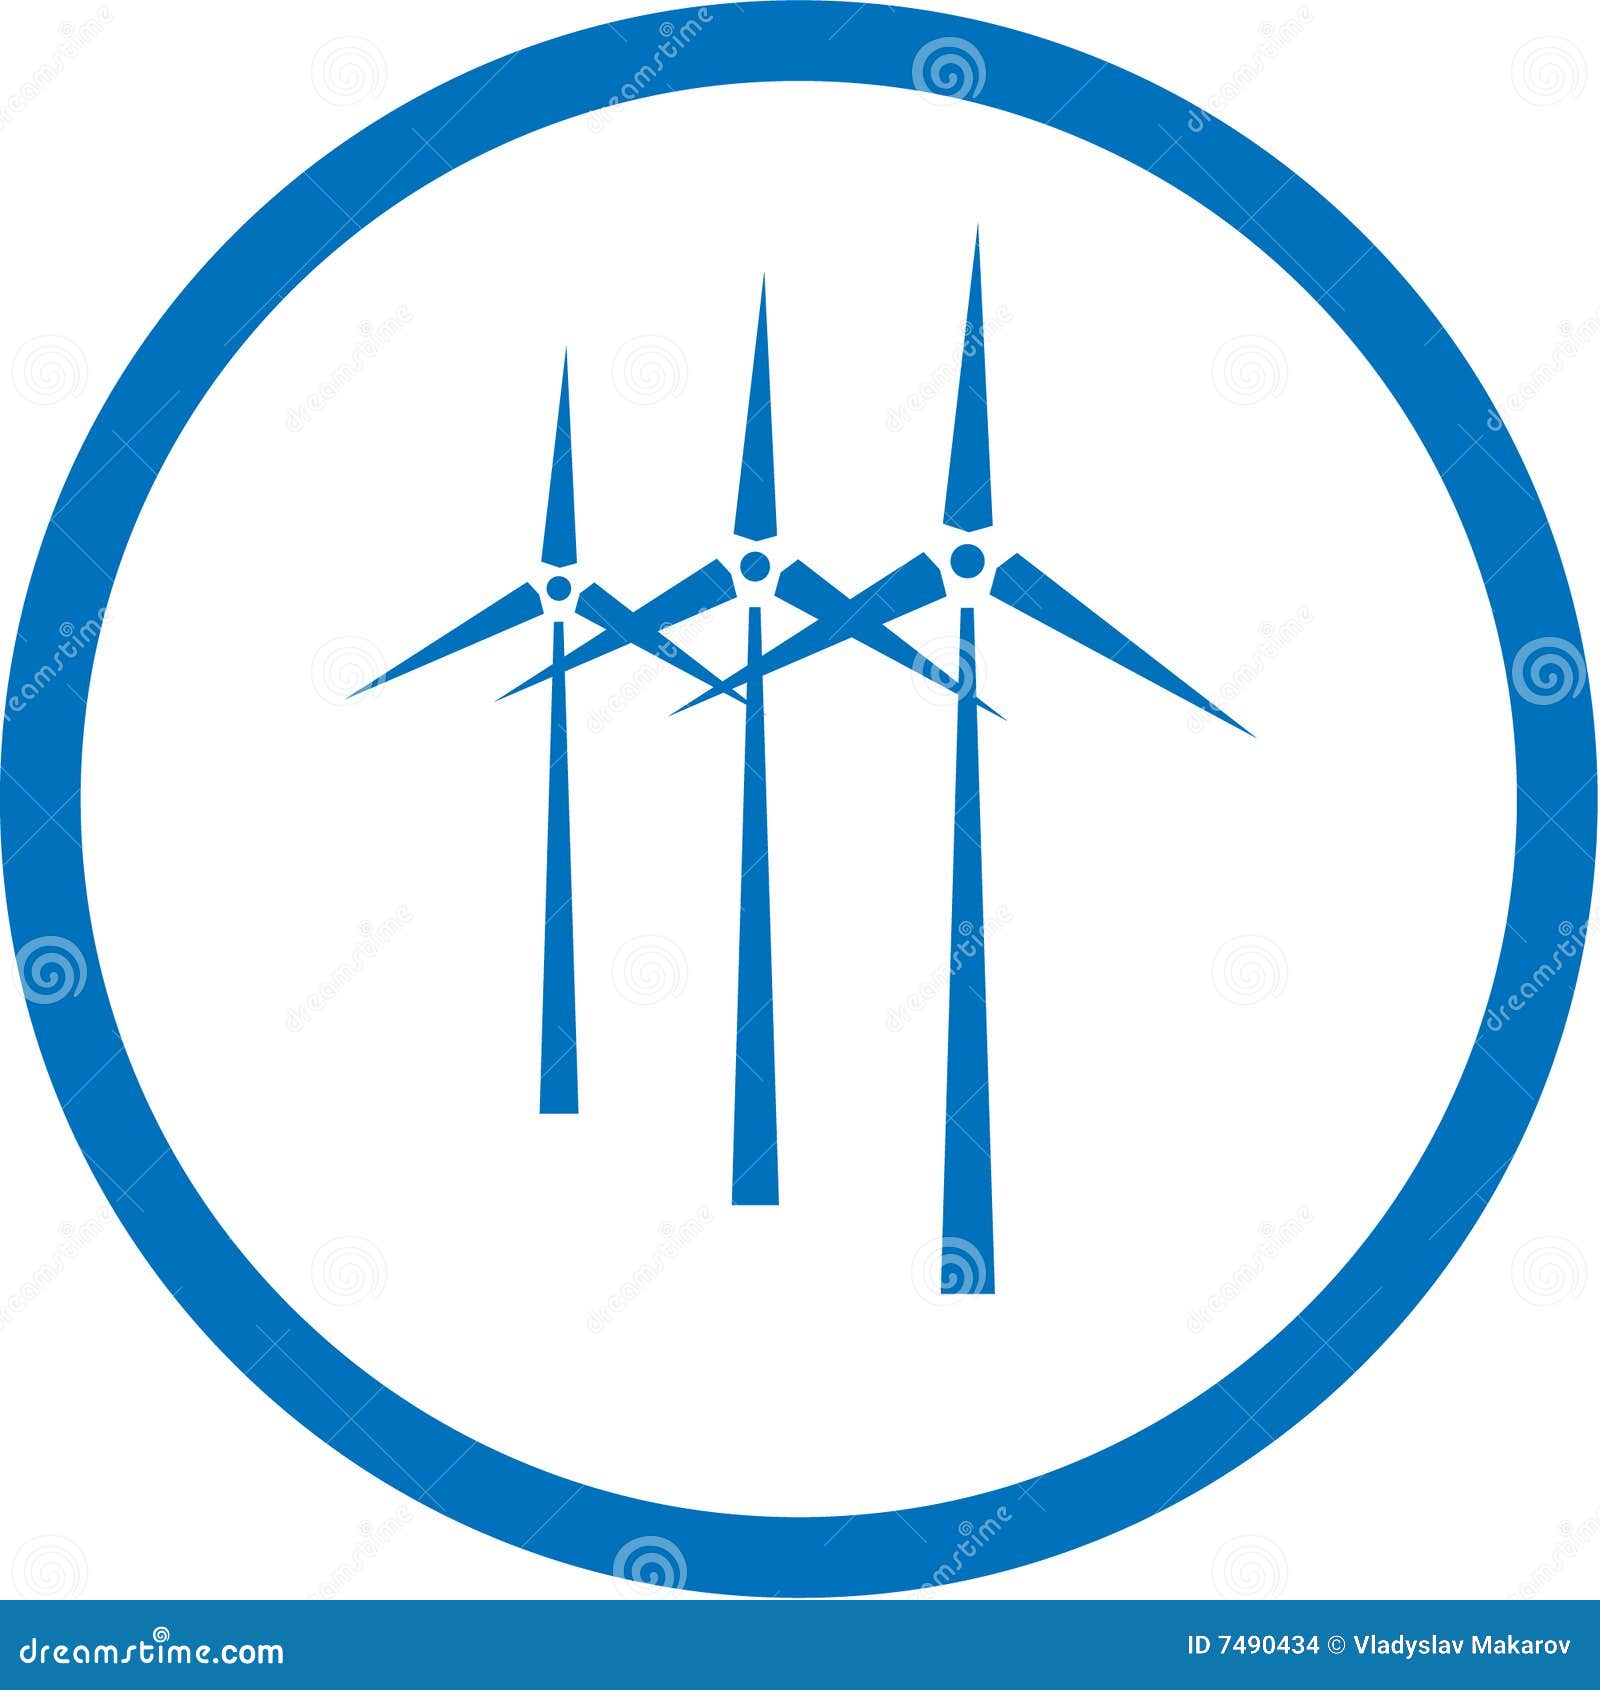 More similar stock images of ` Vector wind turbine icon `